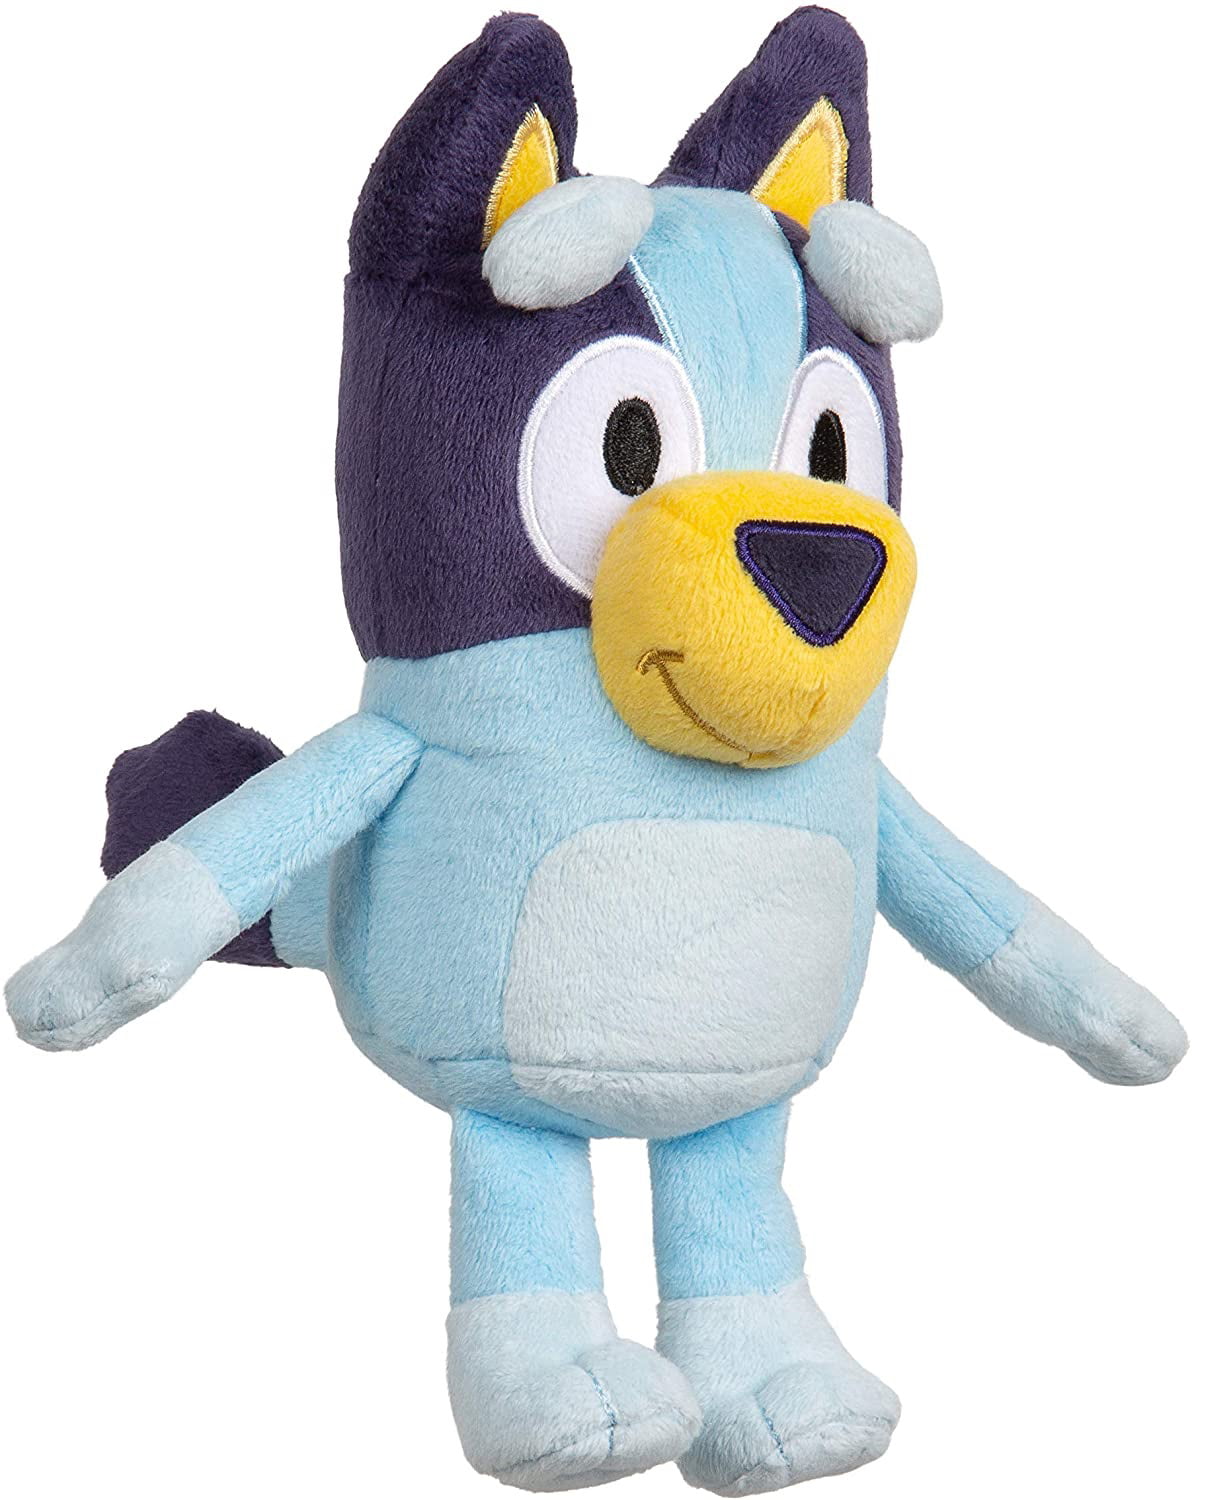 2PCS Pack Toys Figures TV Bluey and Bingo Puppy Plush Cartoon 11 Inch for Gift